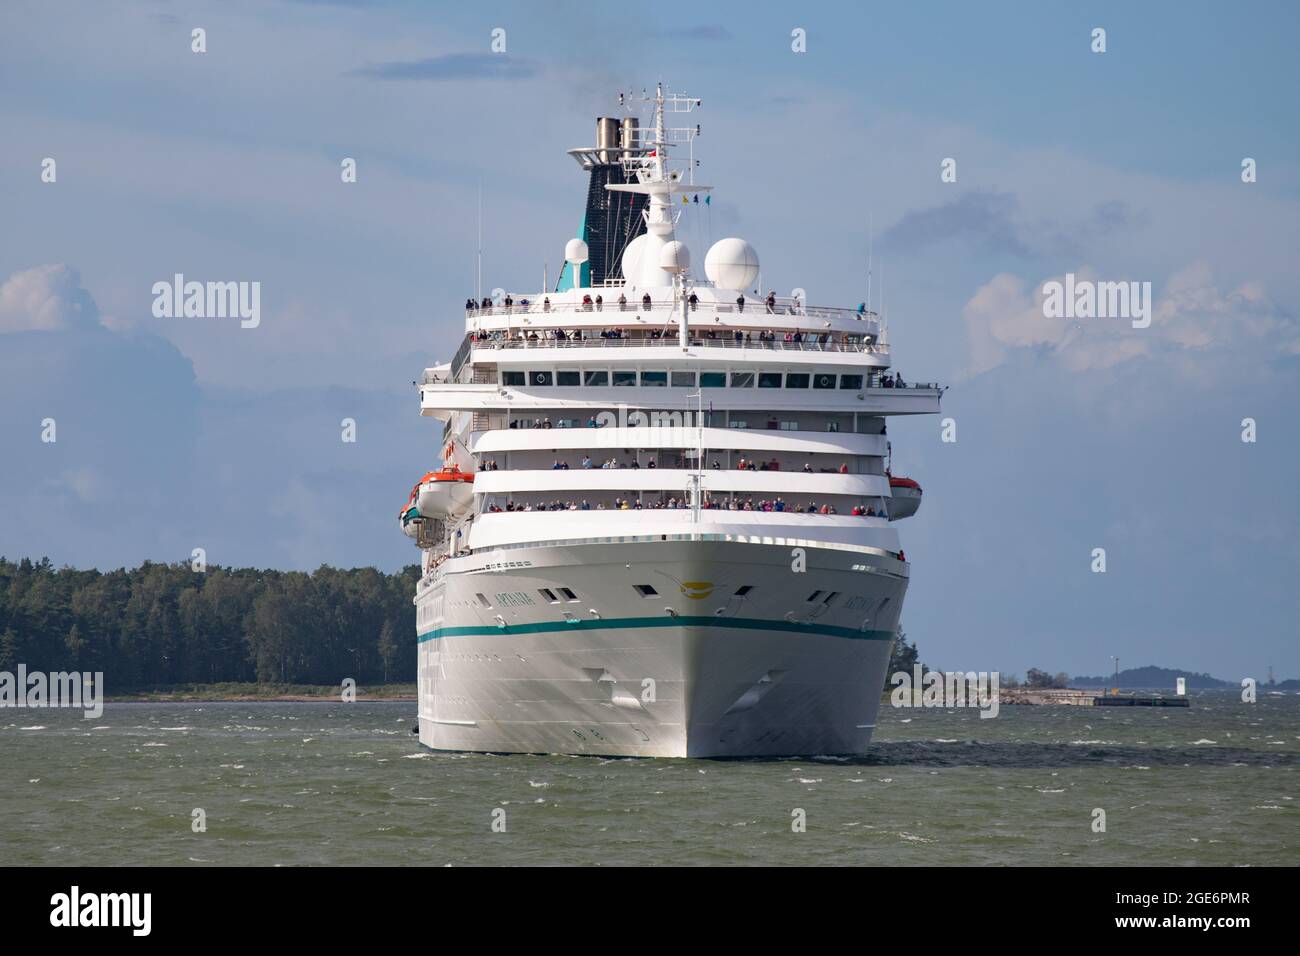 Phoenix Reisen-operated cruise ship Artania arriving Helsinki West Harbour as a third cruise ship of the season on 15 August 2021. Stock Photo